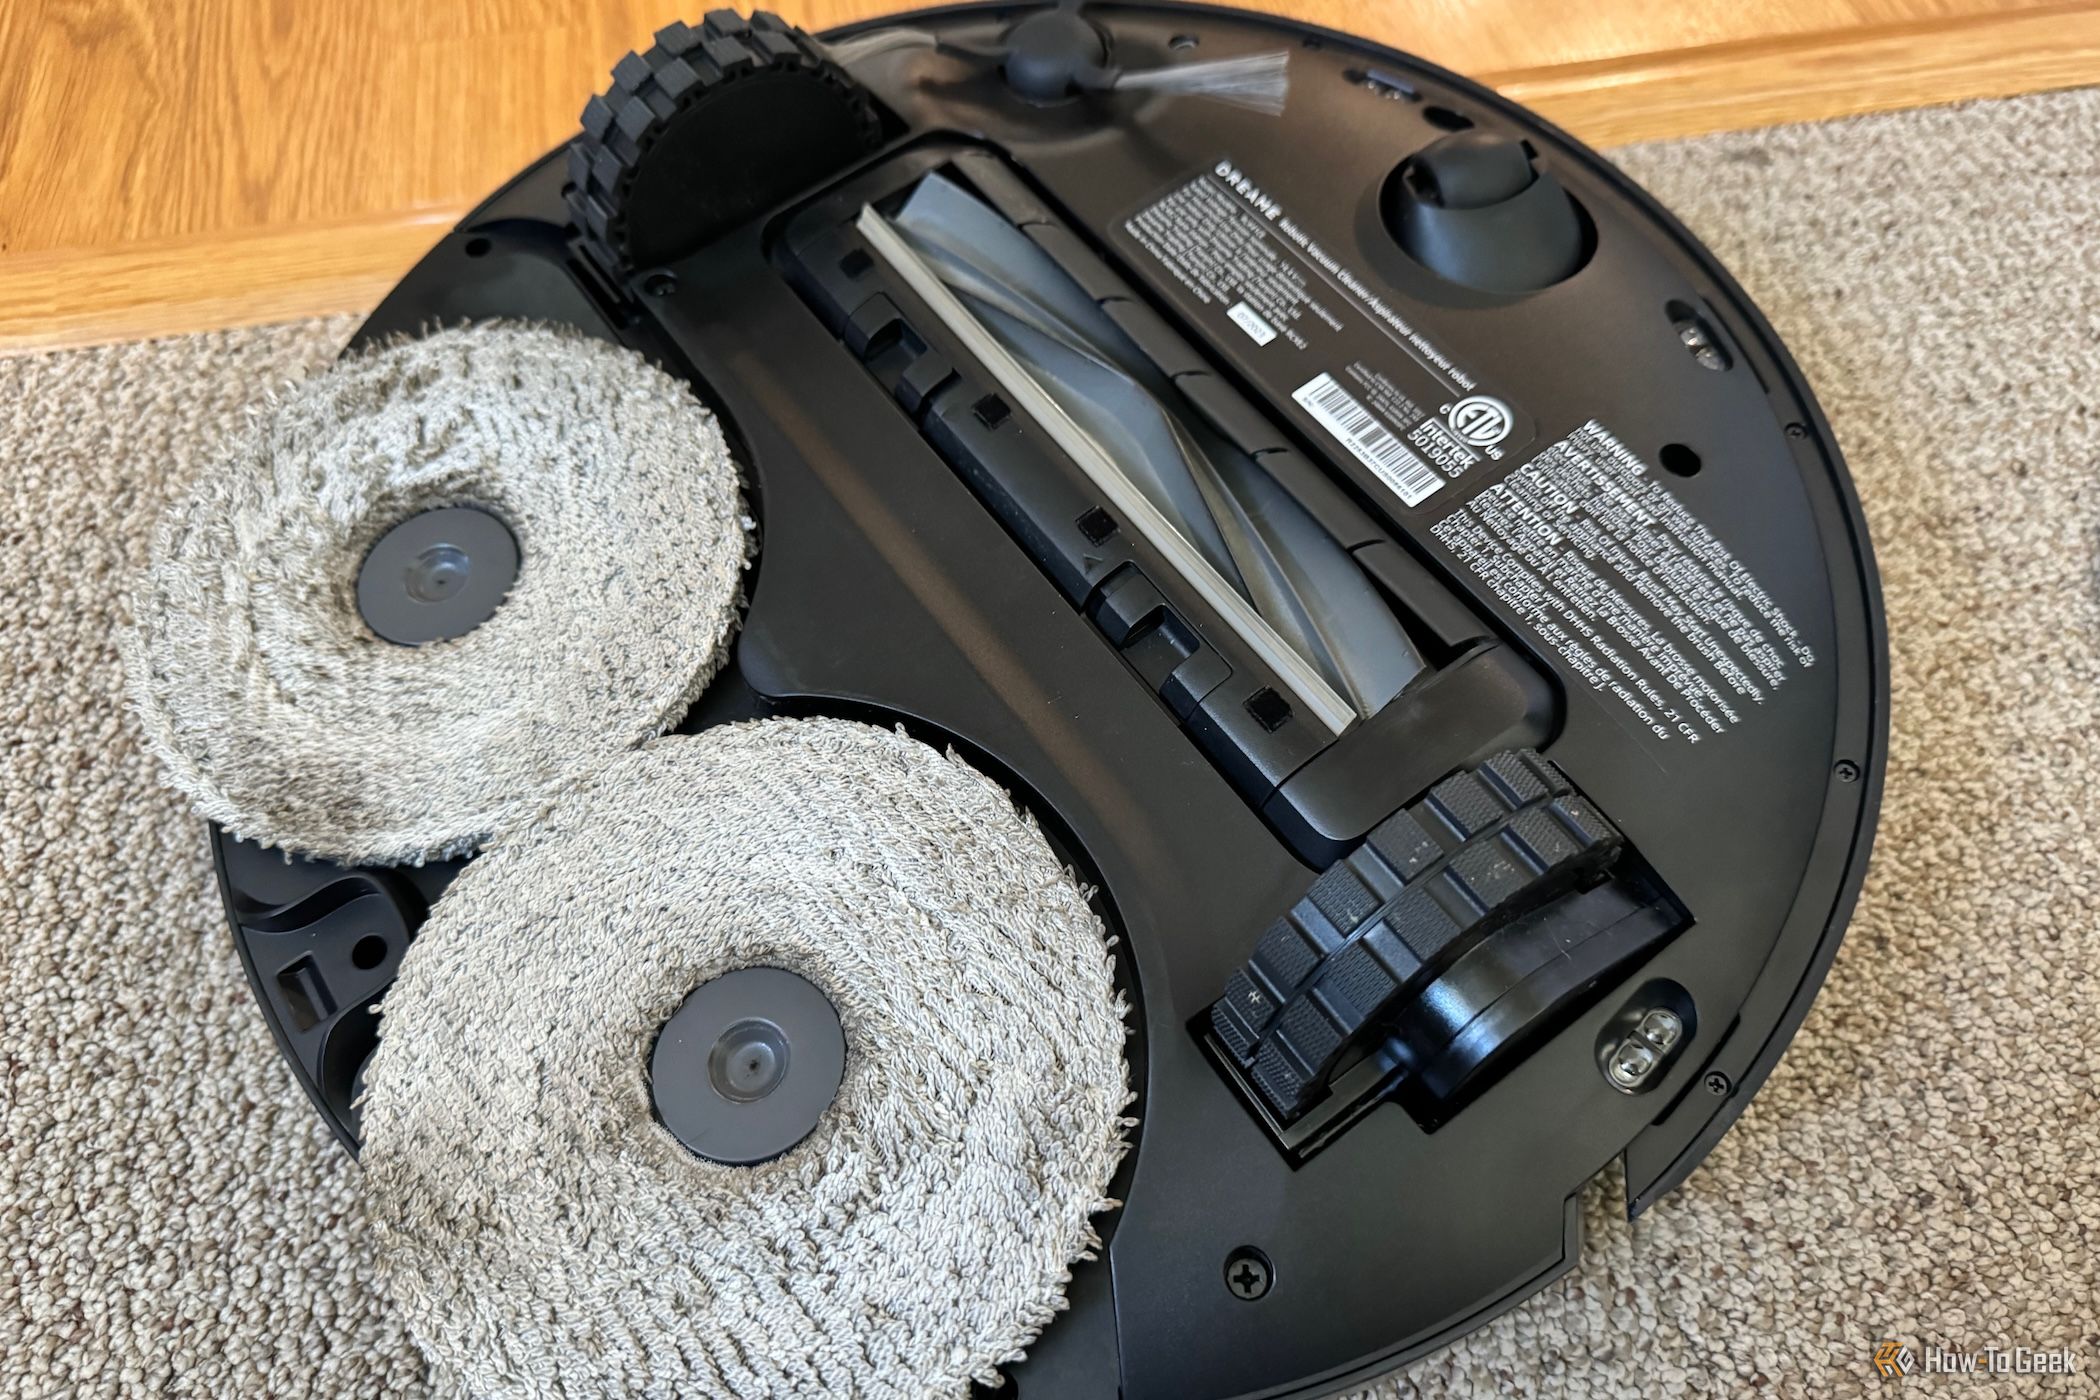 dreame L20 Ultra Complete Robot Vacuum and Mop with MopExtend Mop Removal  and Raising DualBoost 2.0 Auto-Empty Mop Washing AI Action LDS Navigation